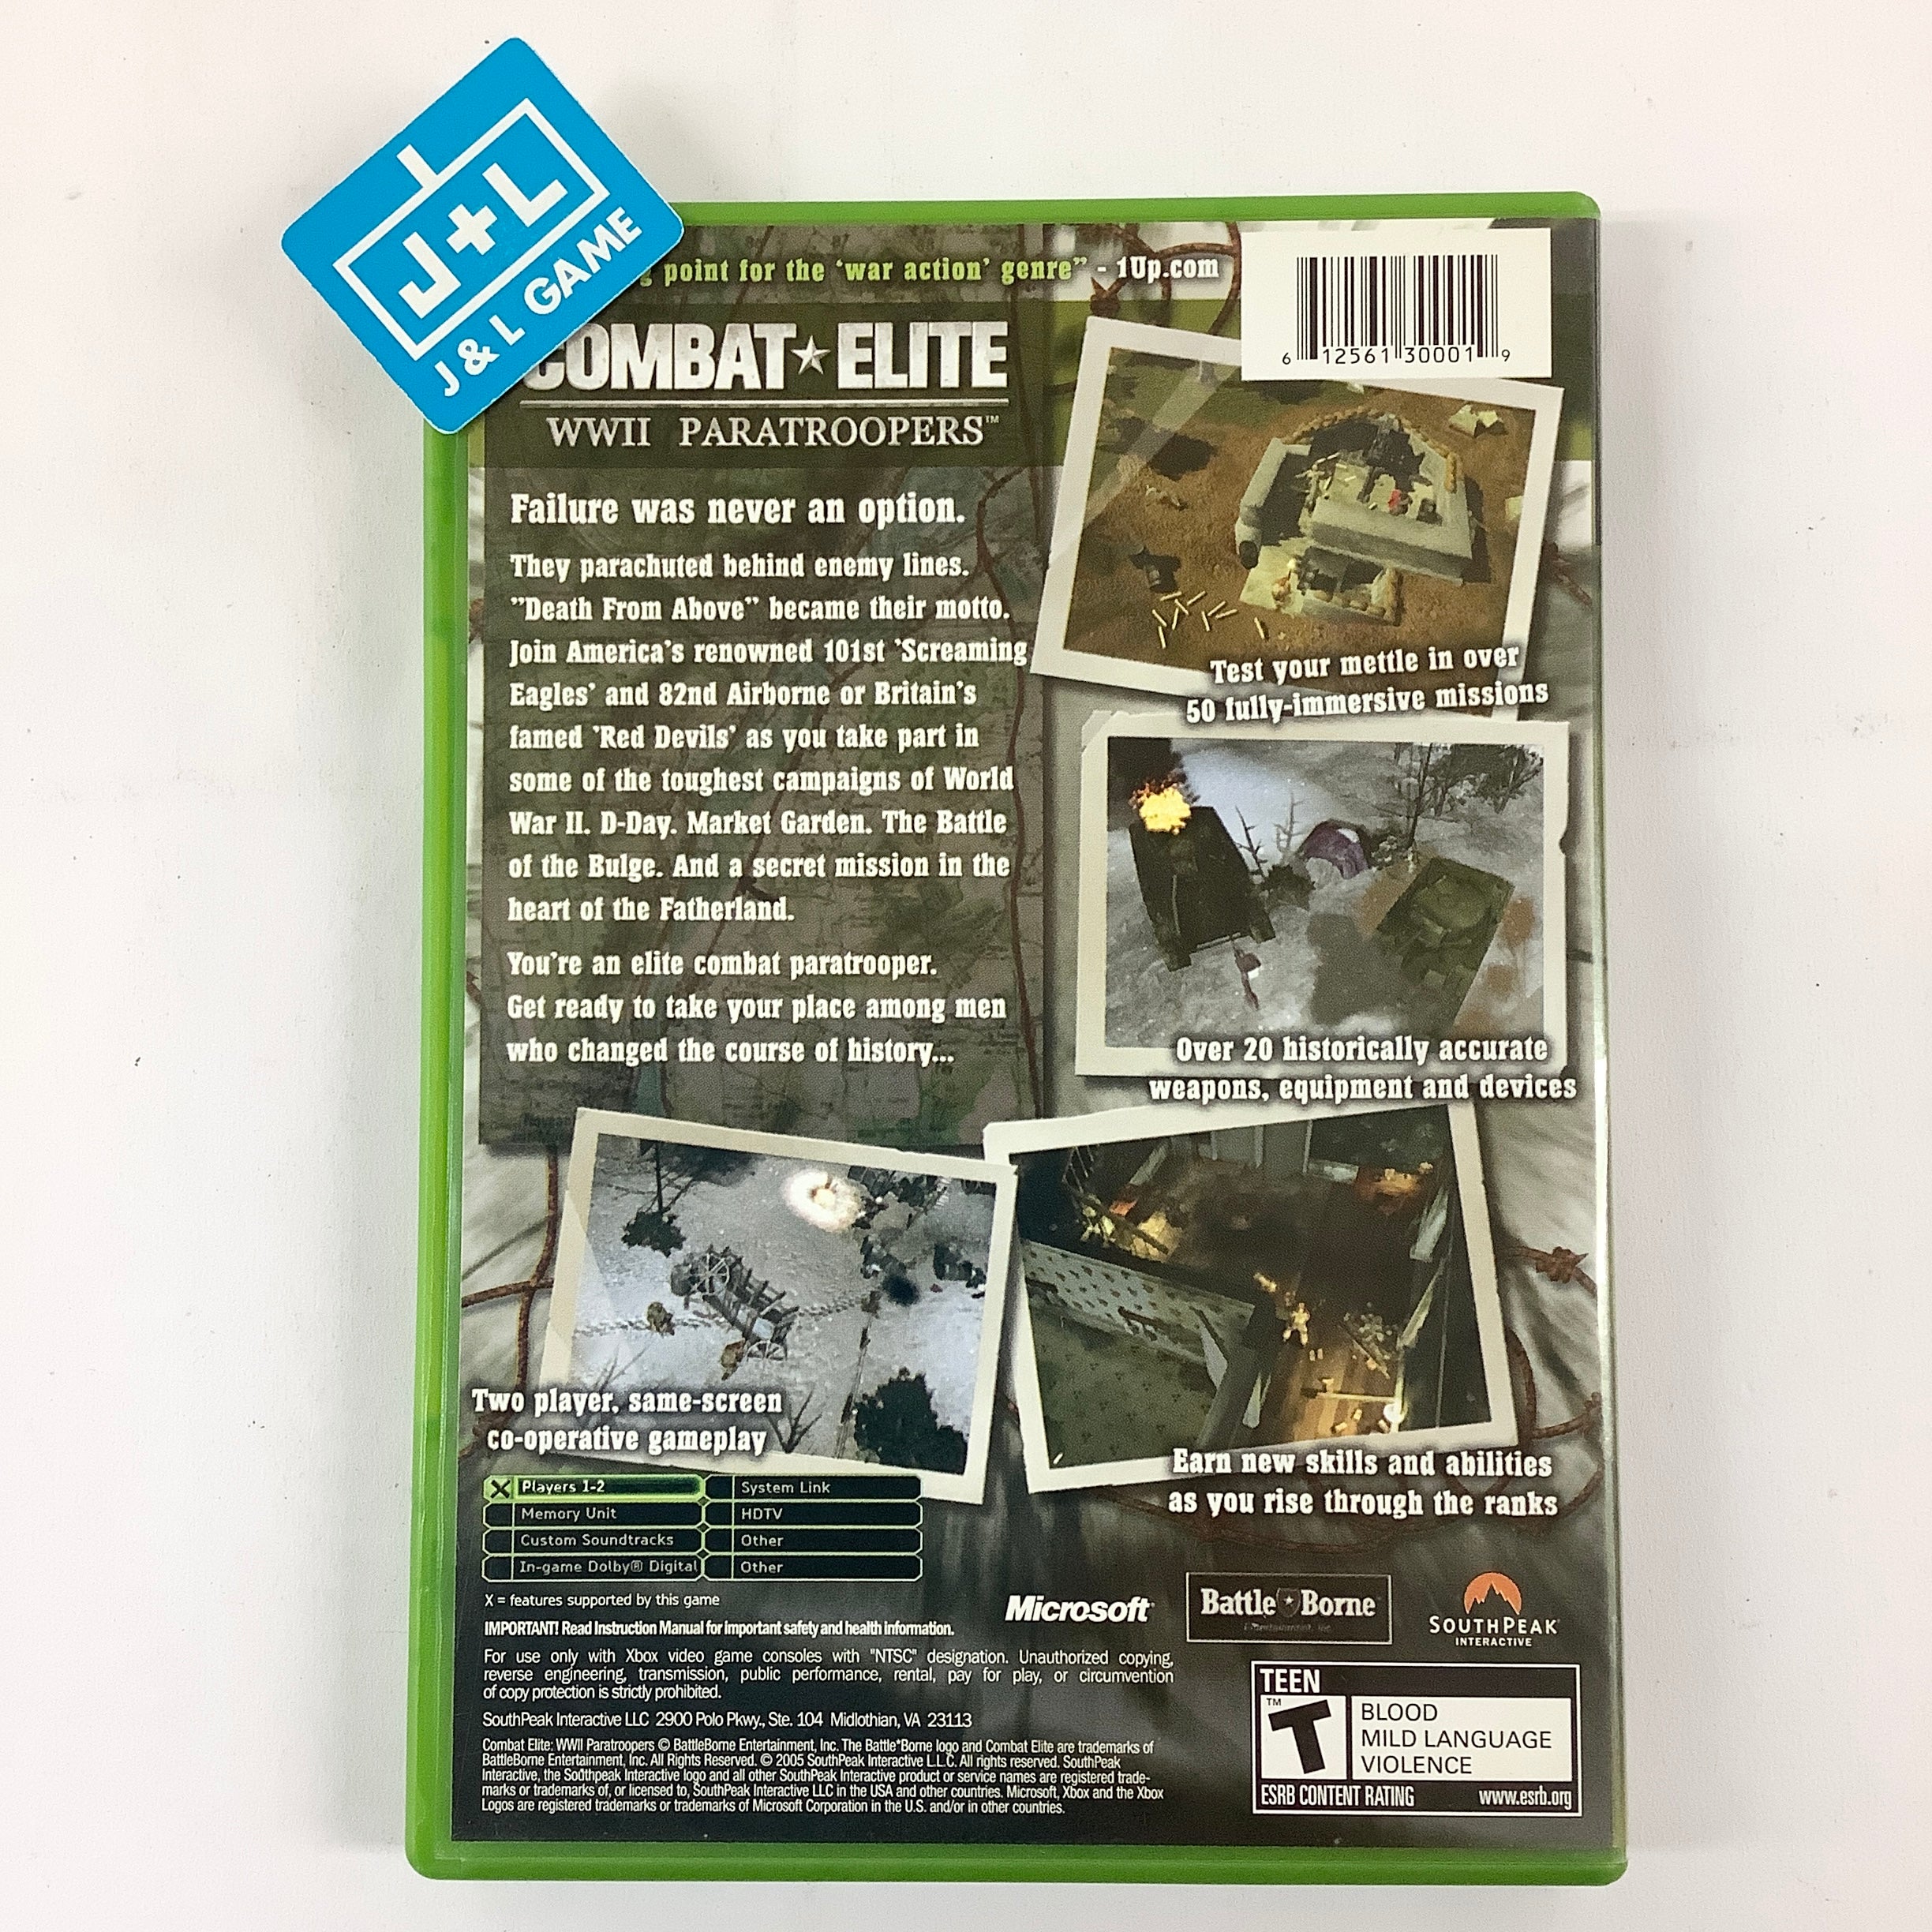 Combat Elite: WWII Paratroopers - (XB) Xbox [Pre-Owned] Video Games SouthPeak Games   